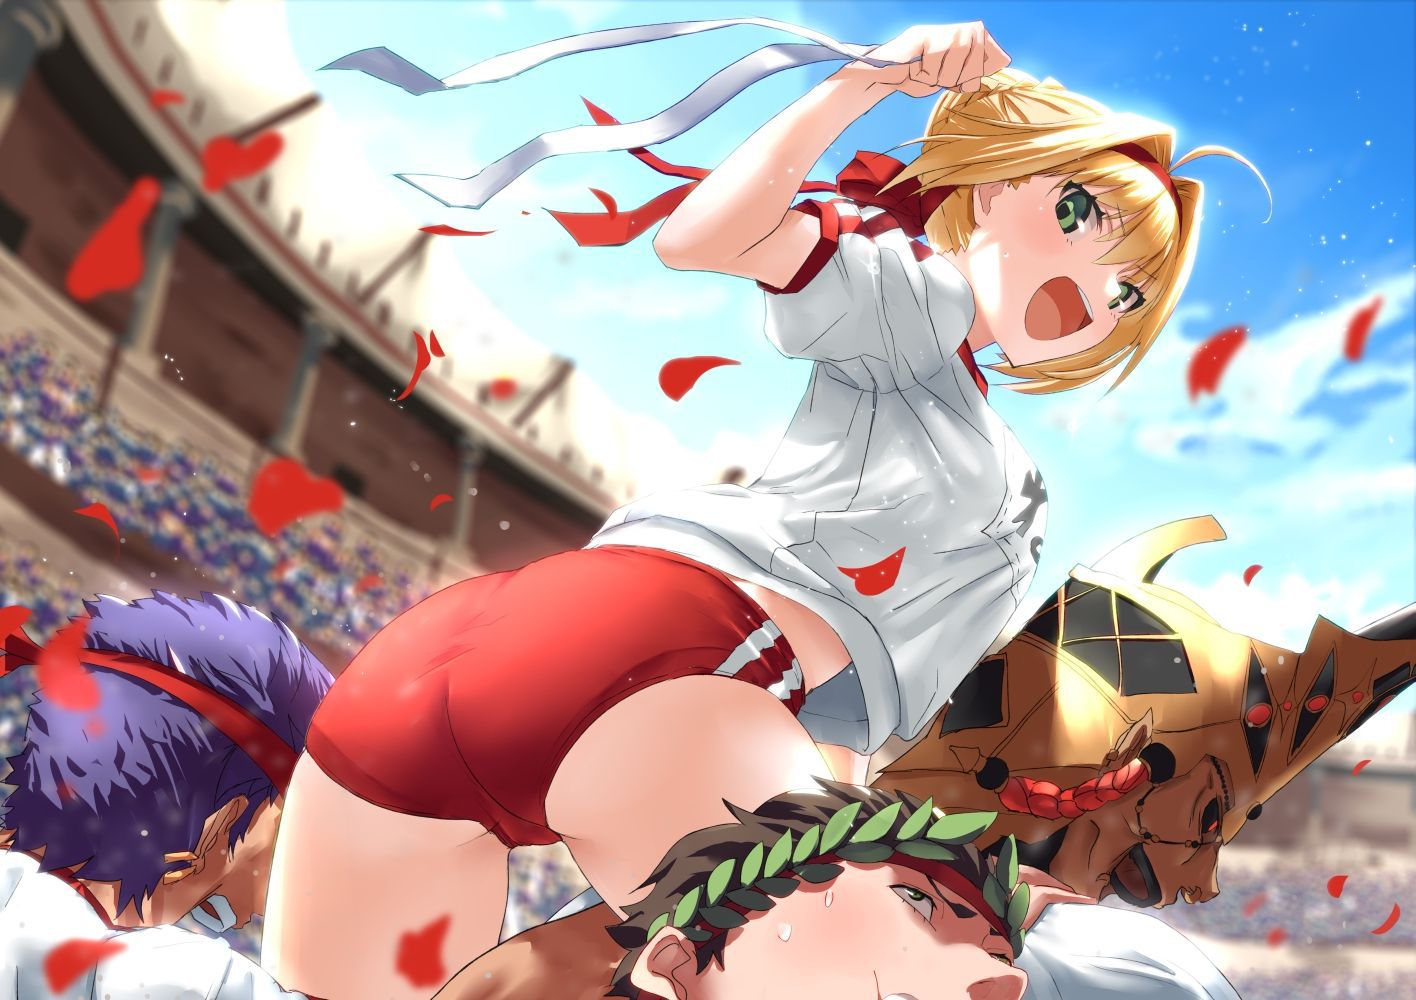 [Secondary ZIP] is about to start anime 100 pieces of cute image summary of Nero Claudius so soon 56